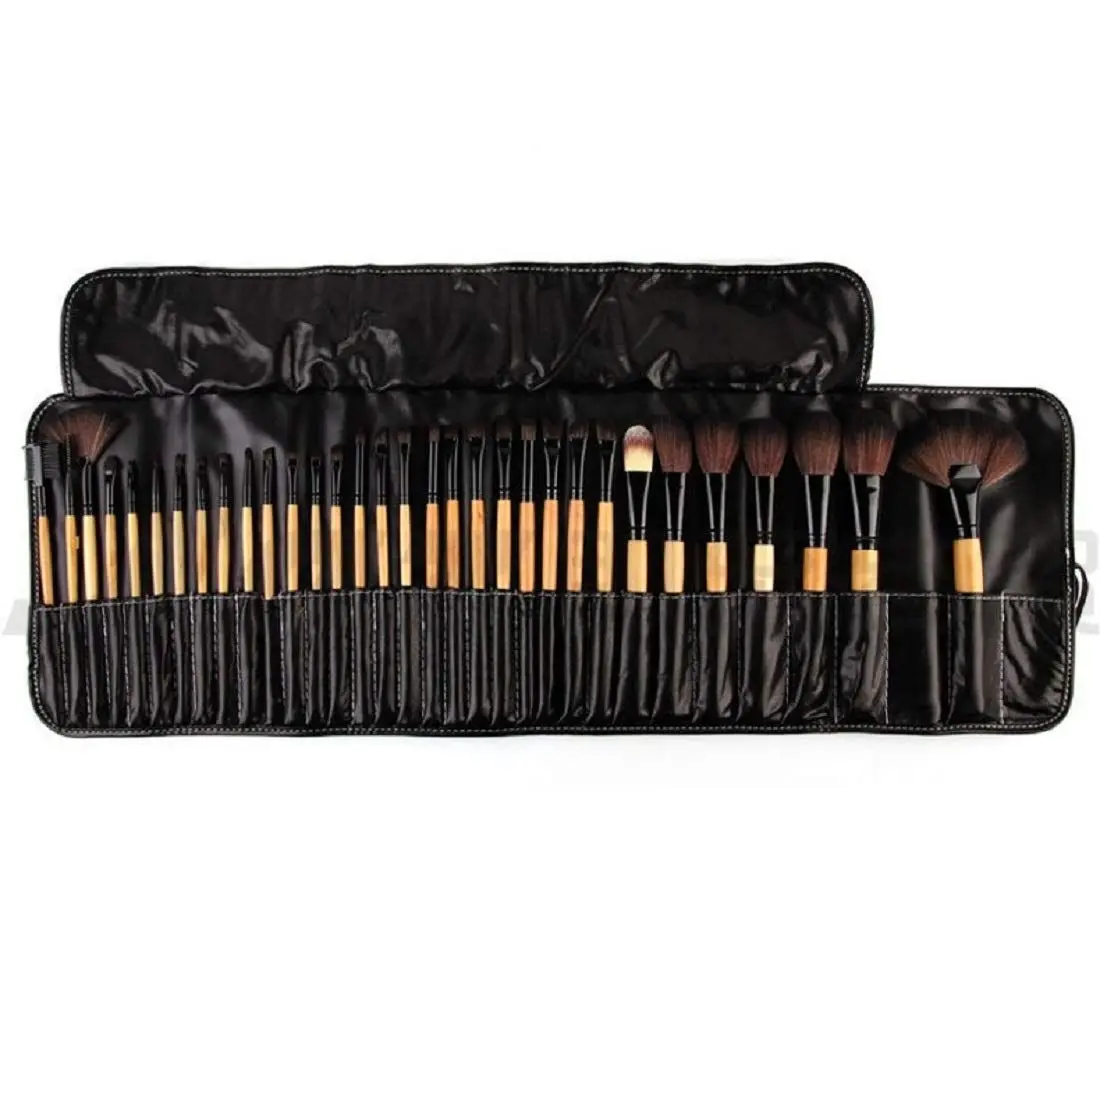 Bronson Professional Makeup Brush Set Of 32 Pcs With Faux Leather Storage Pouch